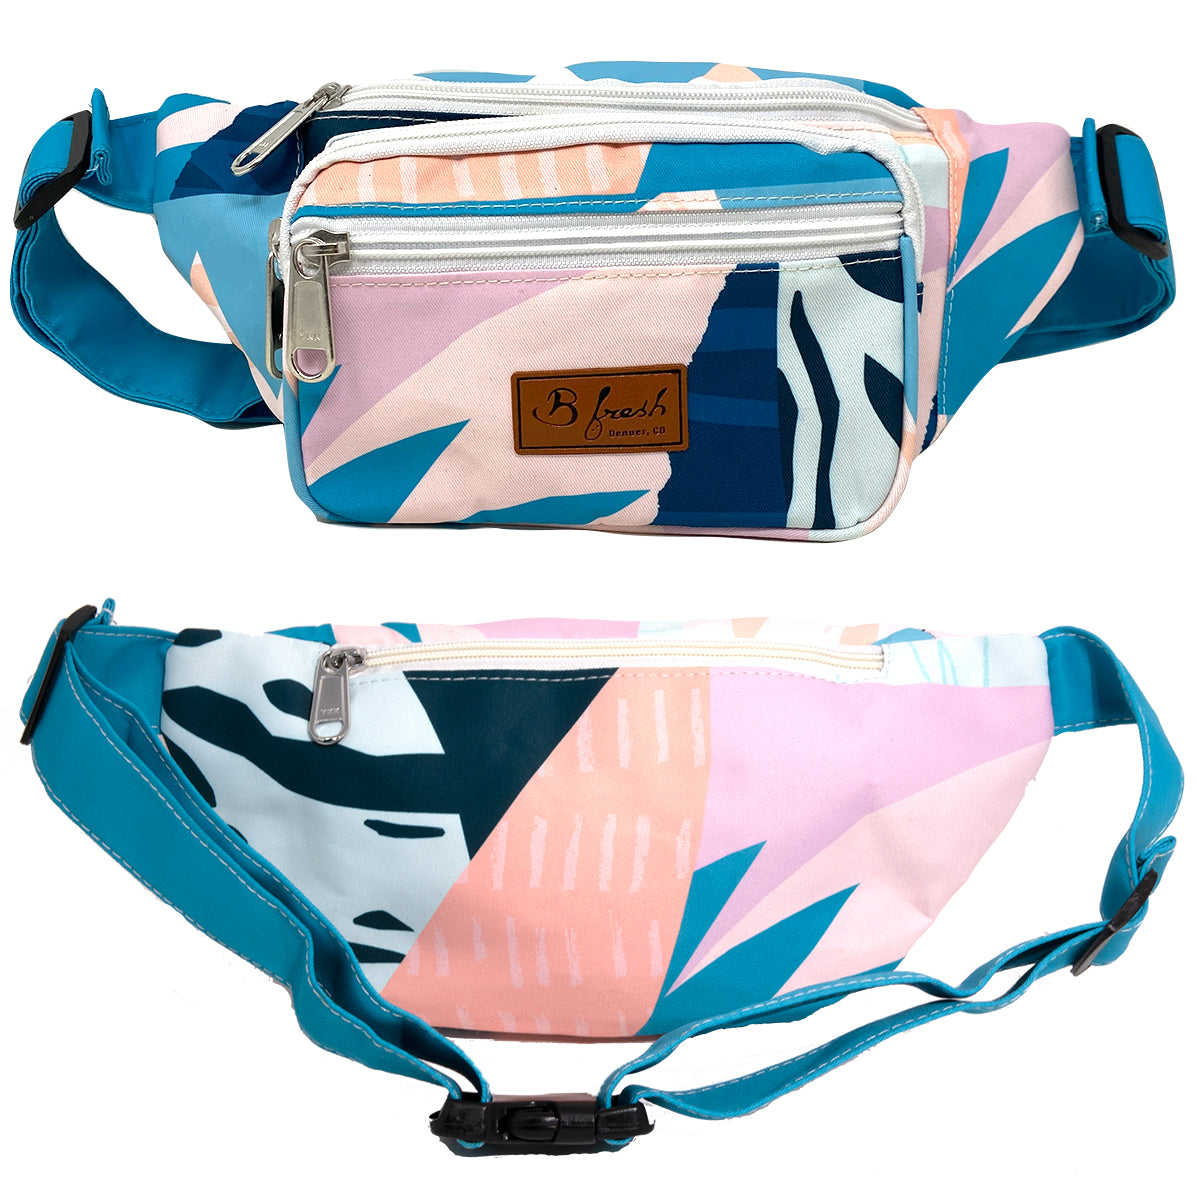 Coridial Retro Style Fanny Pack - Blue, pink, white 80s style design and pattern on a 4 pocket fanny pack. B Fresh Gear